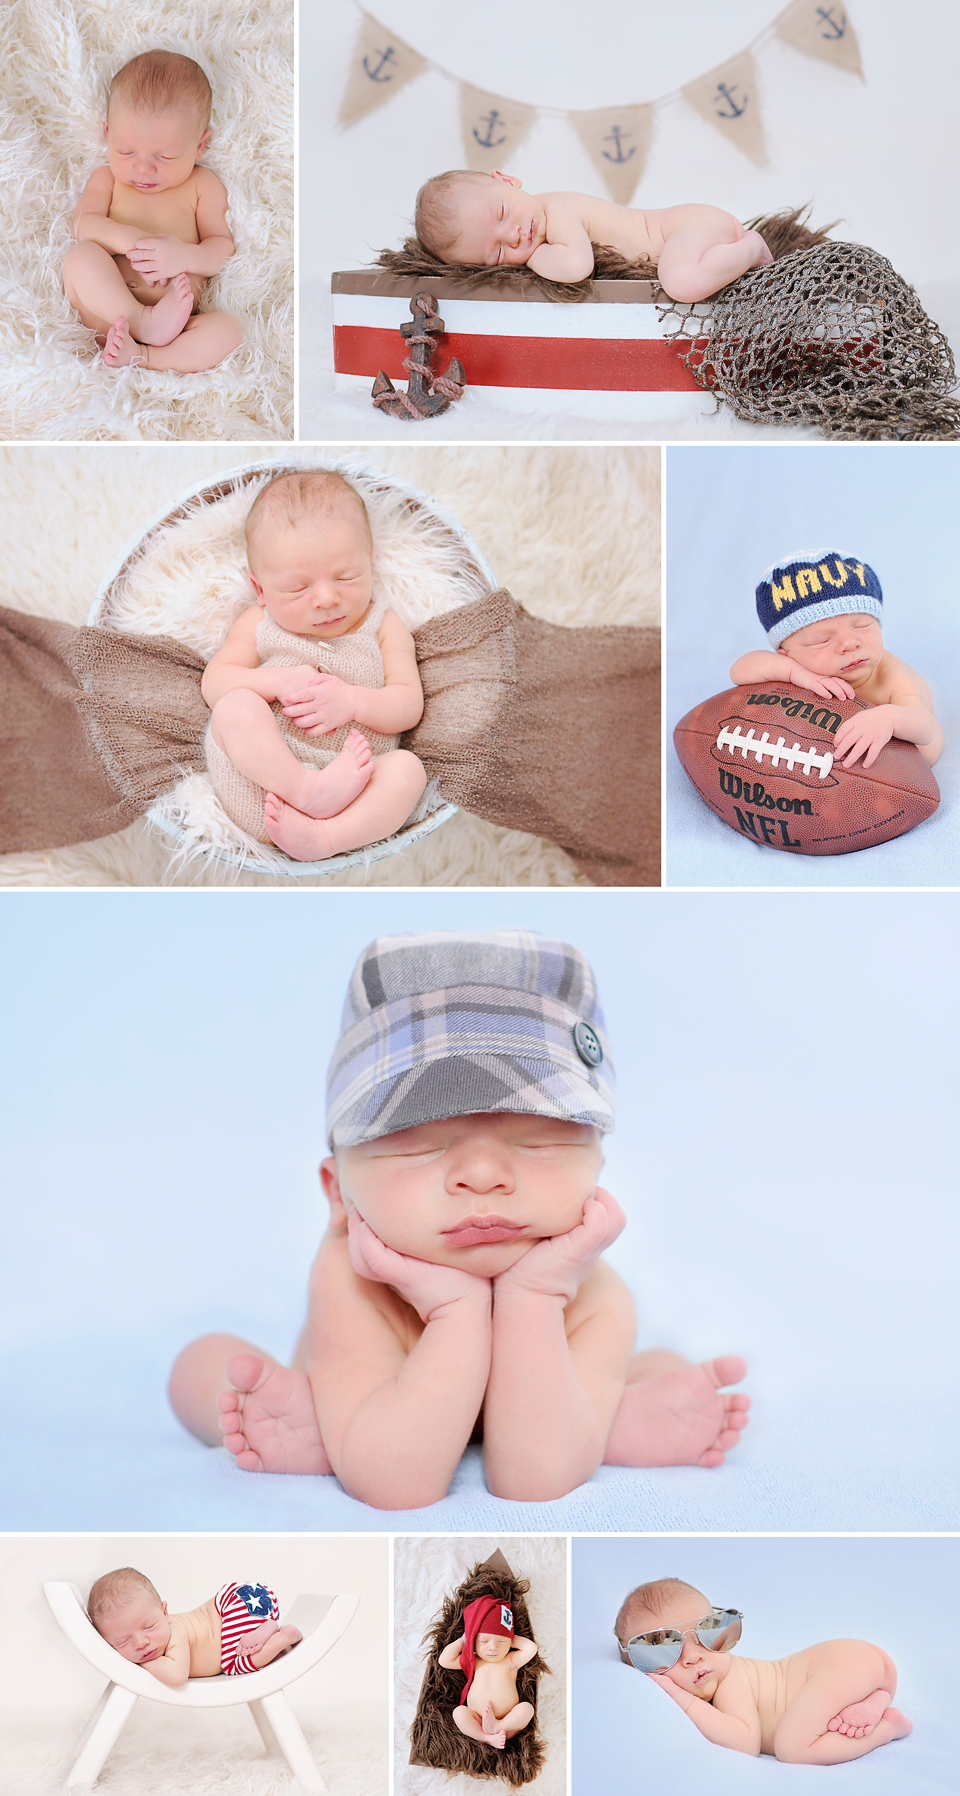 Just a little sneak peek of a small fractions of portraits from this little guy's newborn session.